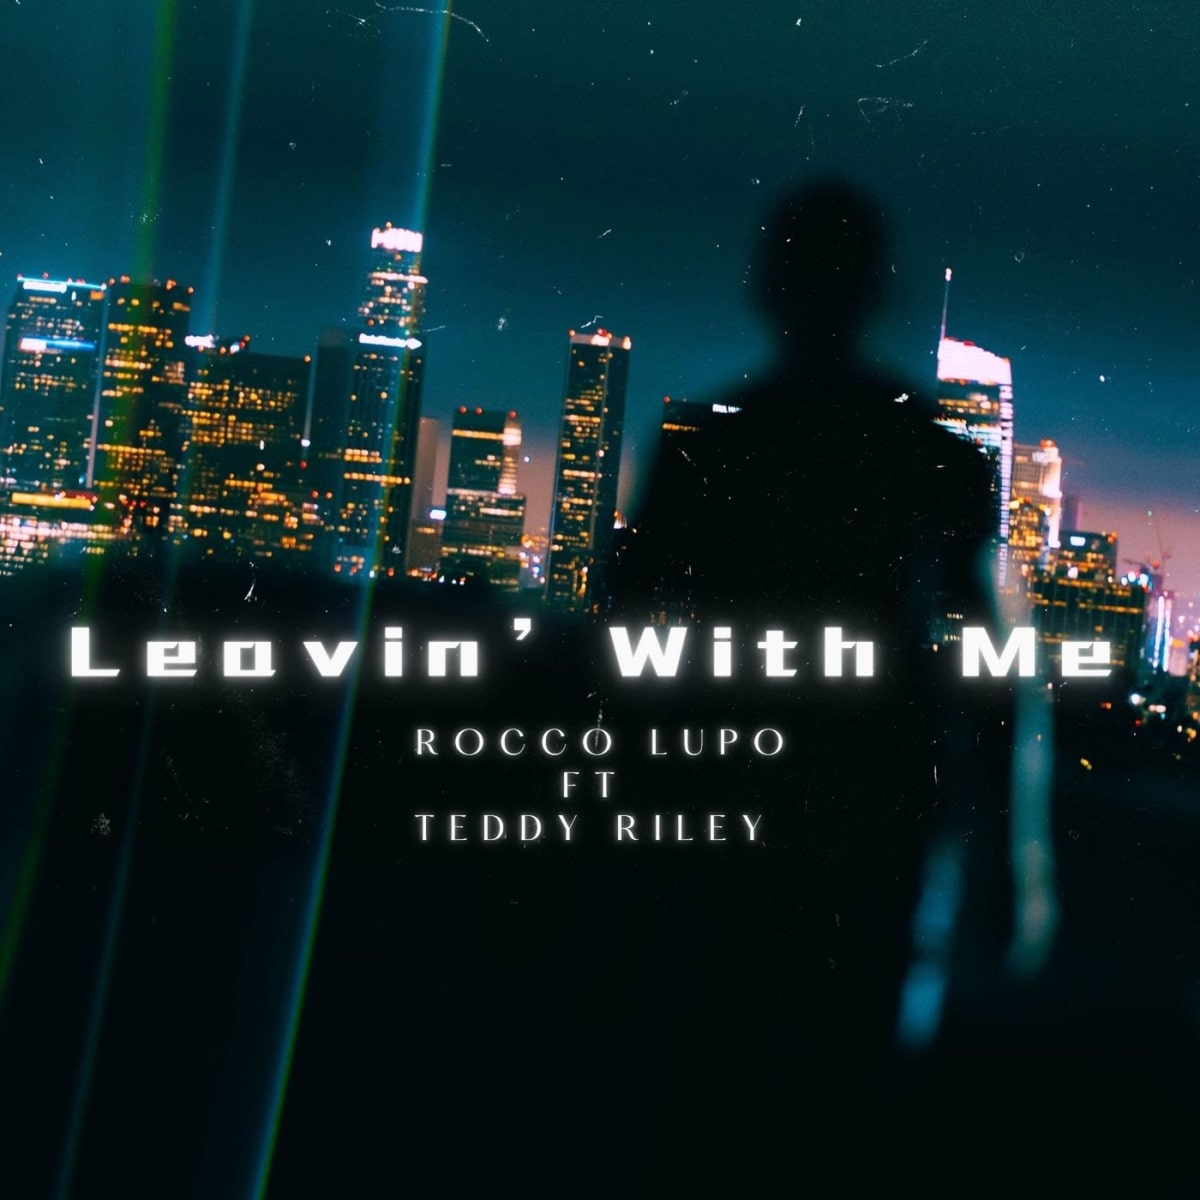 Rocco Lupo’s Highly Anticipated New Single “Leavin’ With Me” Featuring Grammy Winner Teddy Riley Now Available Worldwide